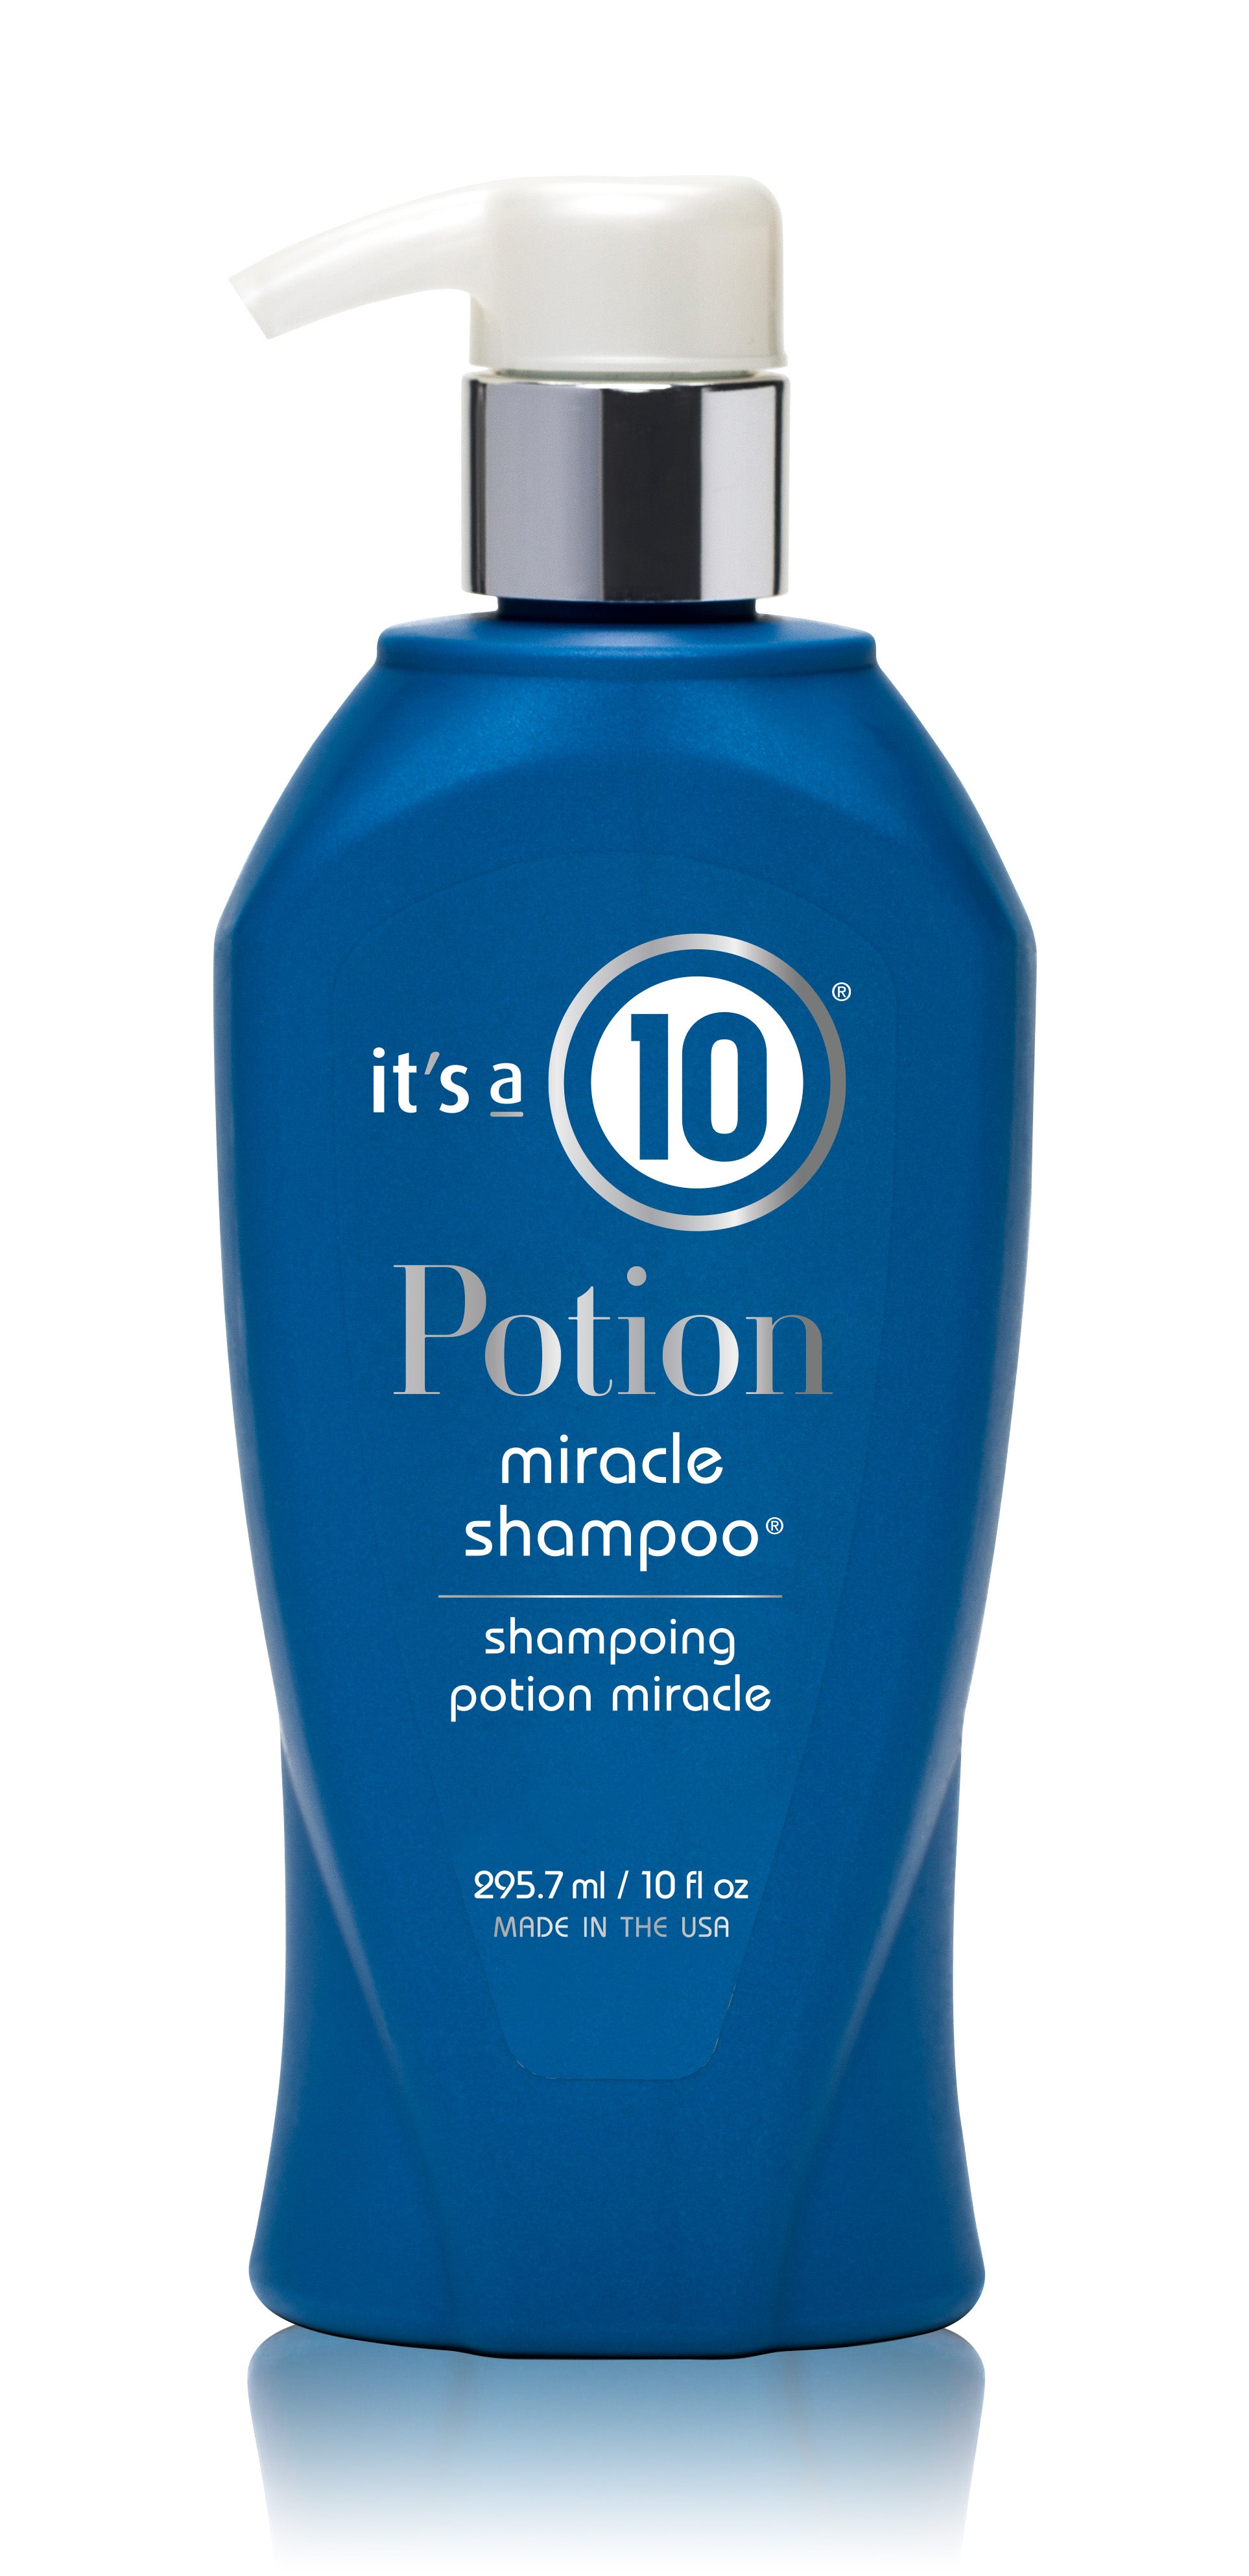 It's a 10 Potion Miracle Daily Shampoo